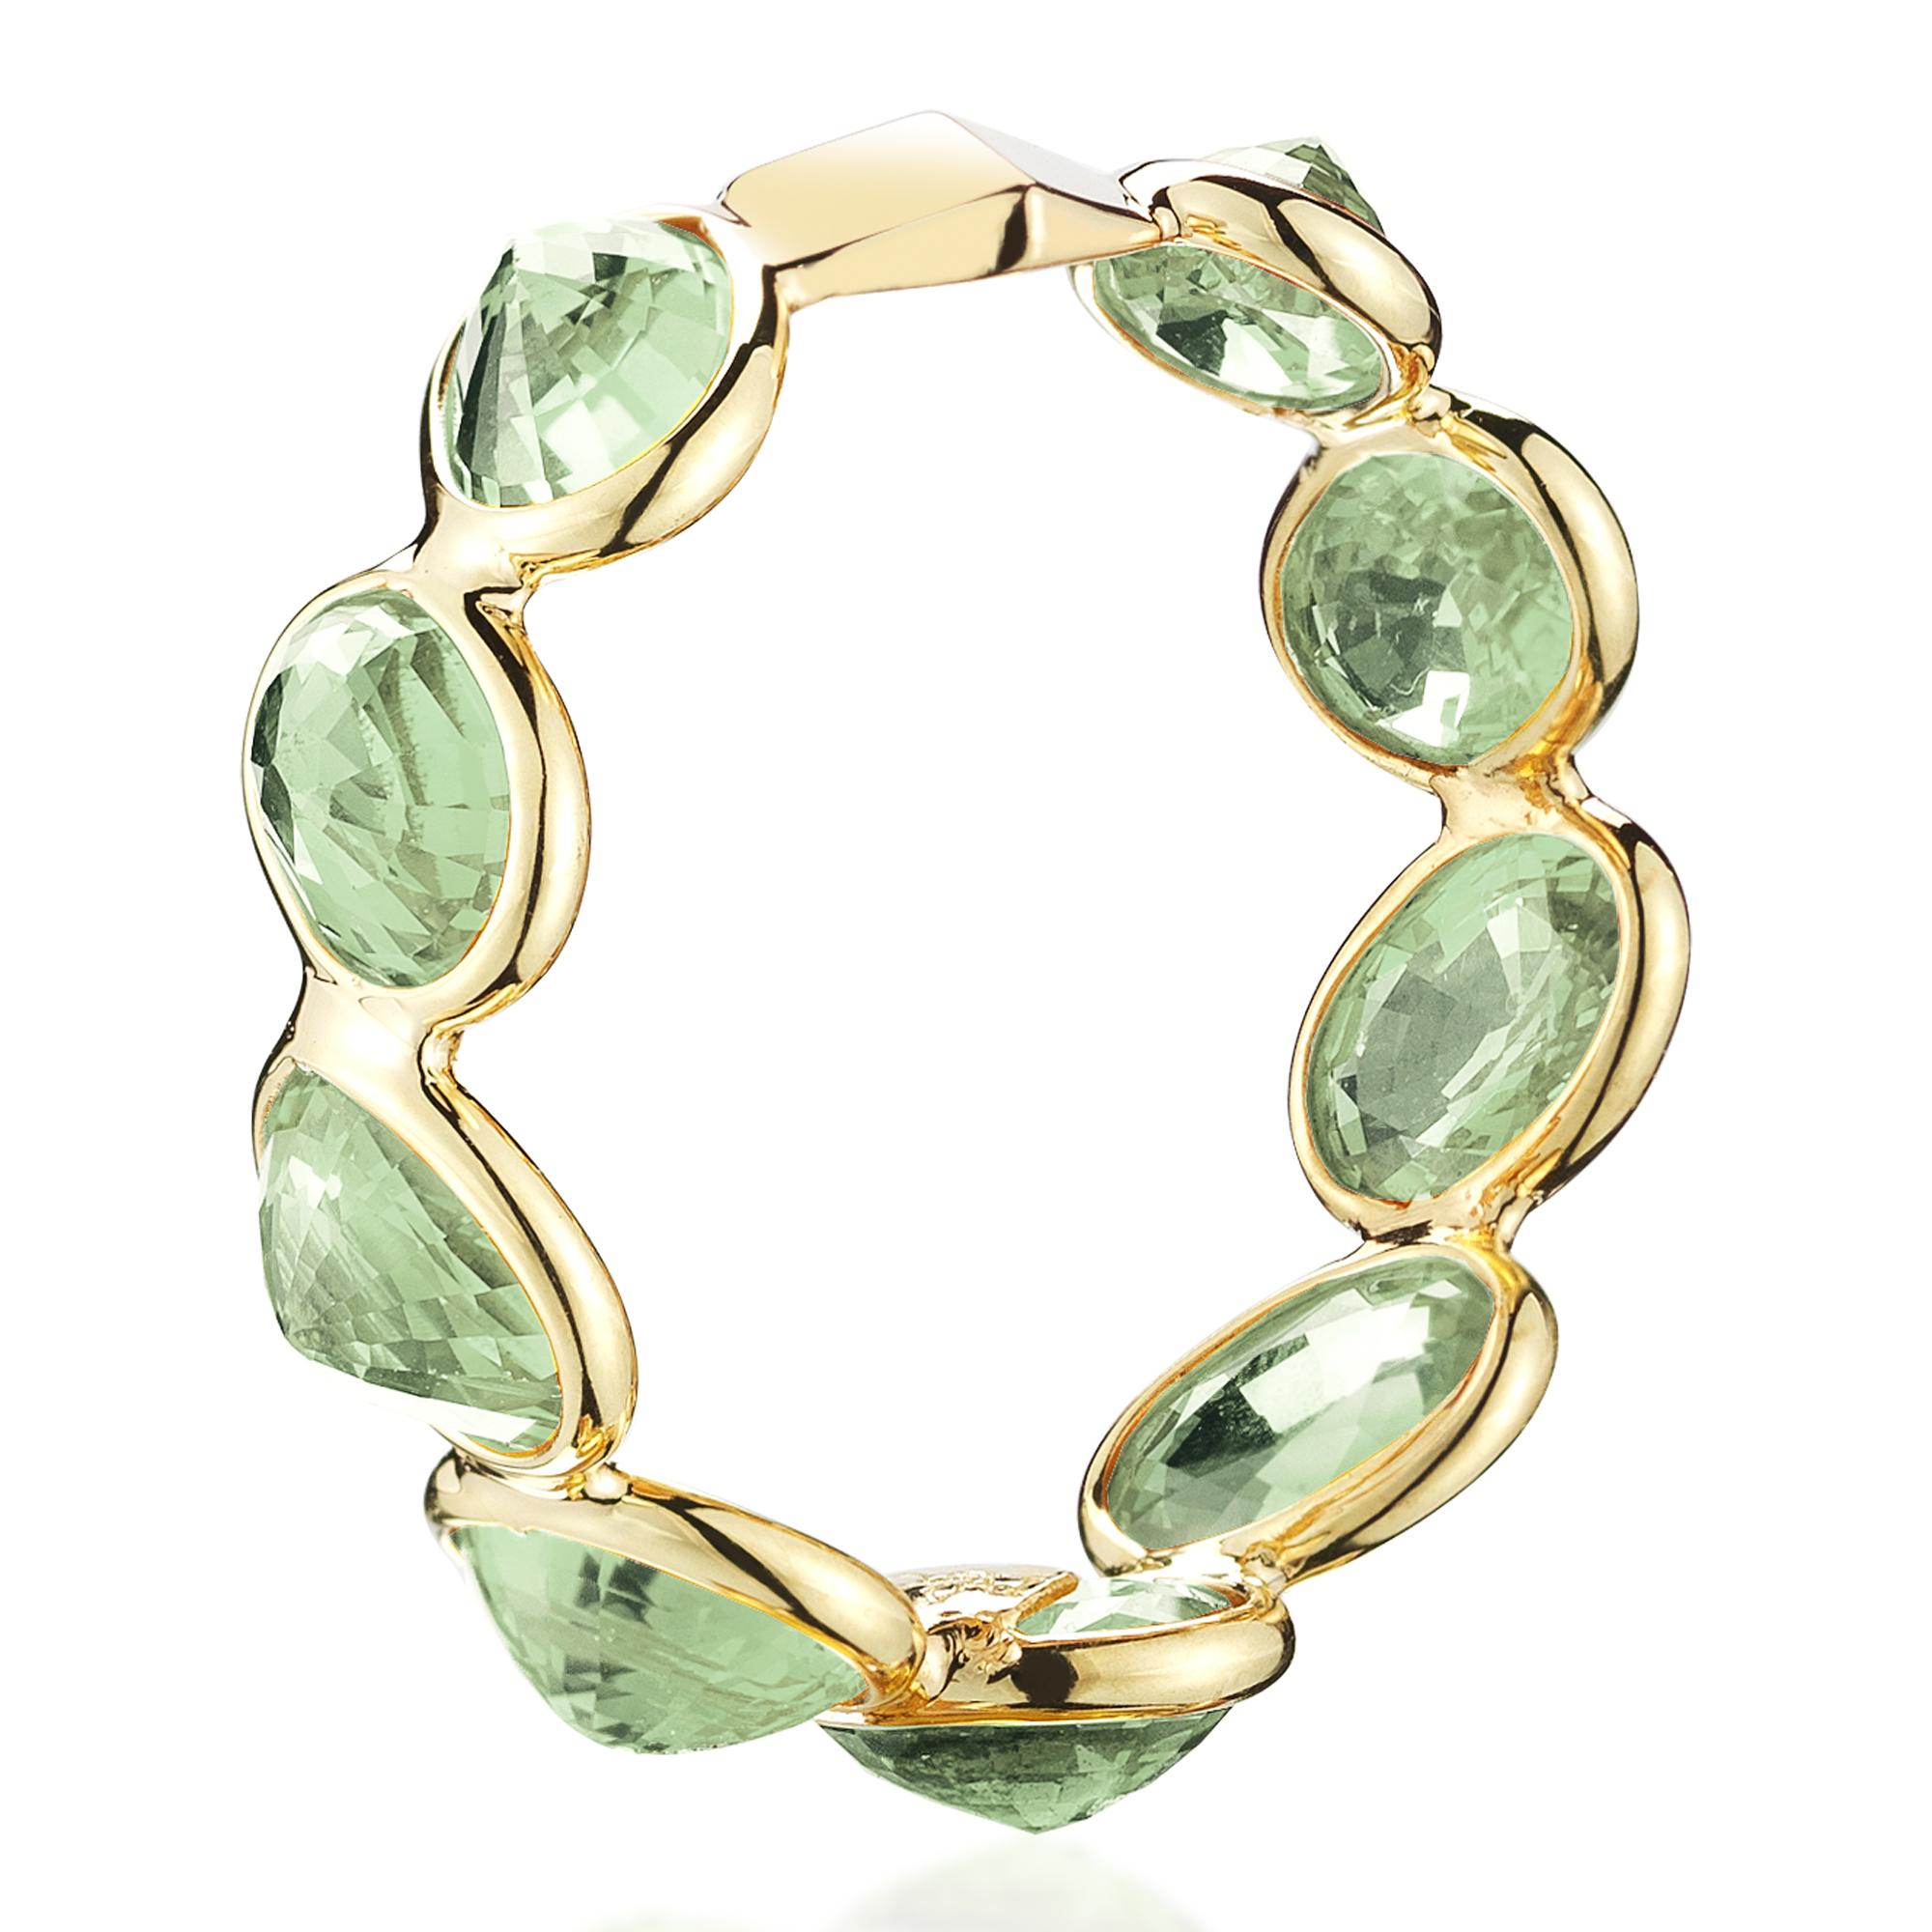 The 18kt yellow gold Ombré band set with multishade oval green sapphires at 11 o'clock® with signature Brillante® motif.

Fresh green oval sapphires come together on a band of 18kt gold forming an exquisite ring. Reminiscent of the Mediterranean Sea